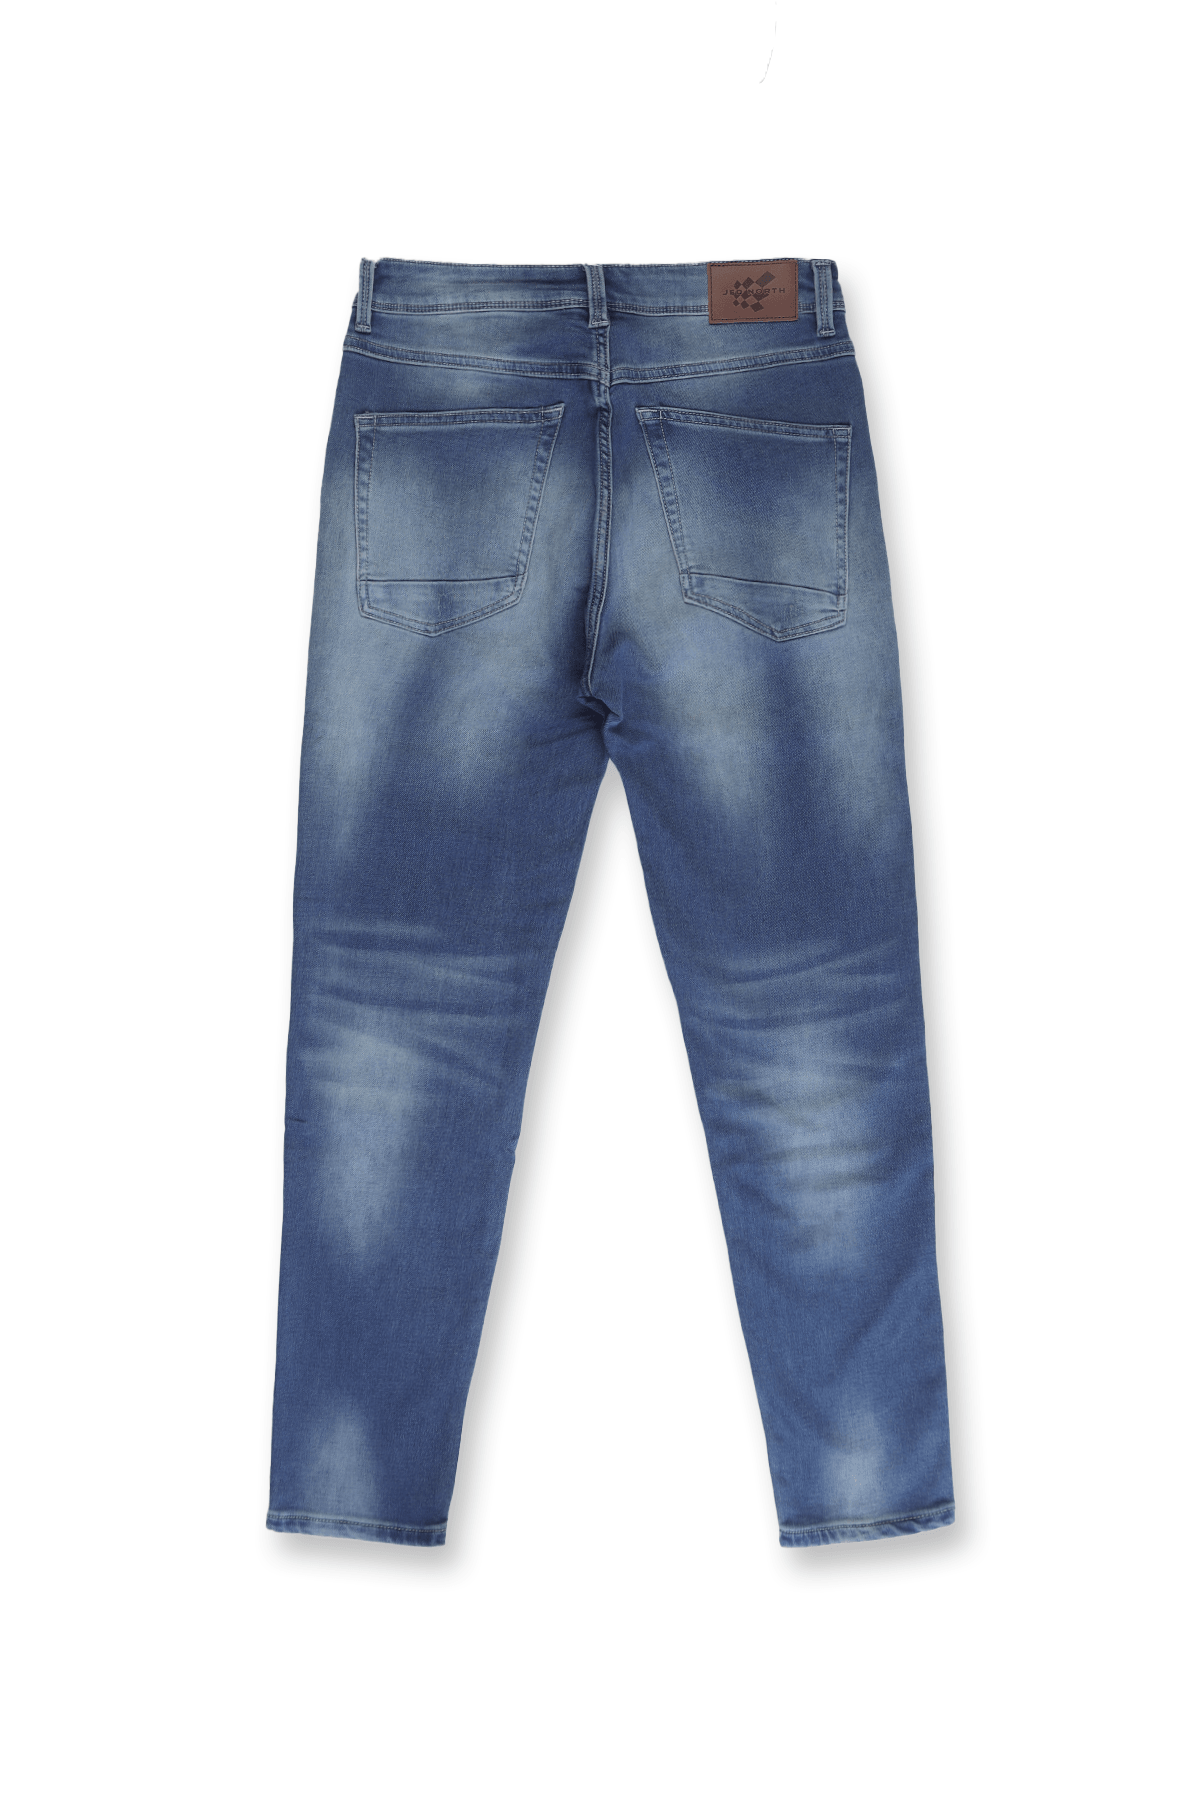 Men's Premium Fitted Stretchy Jeans - Faded Dark Blue - Jed North Canada